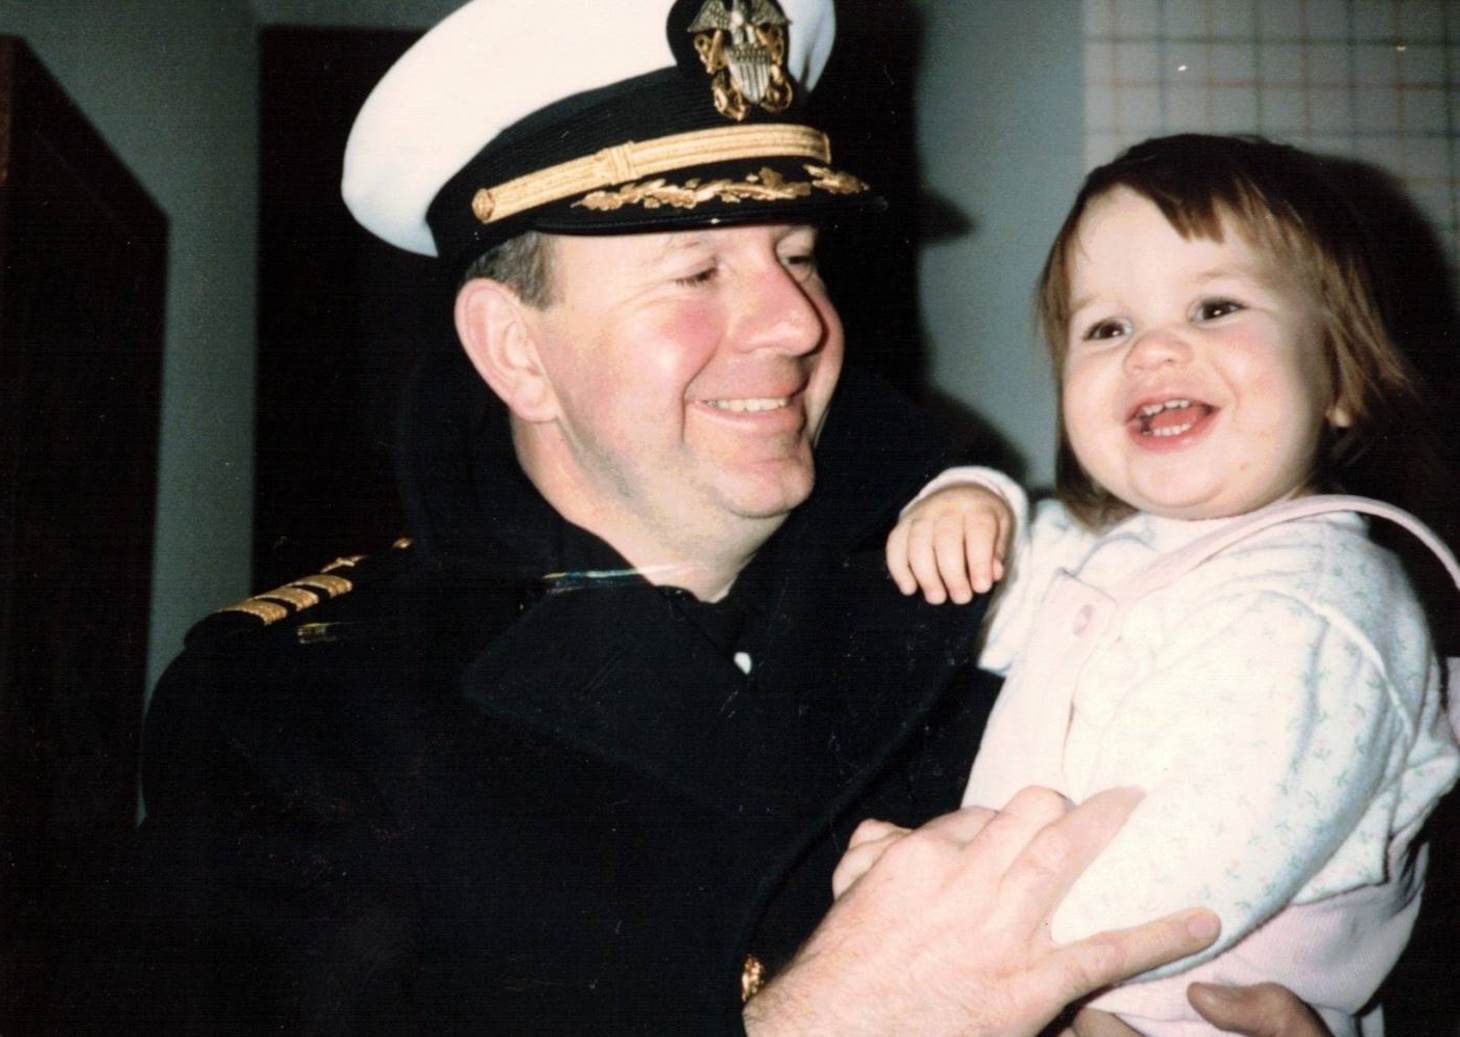 Ens. Erin Omberg as a child and her father. (Photo courtesy of Ens. Erin Omburg)